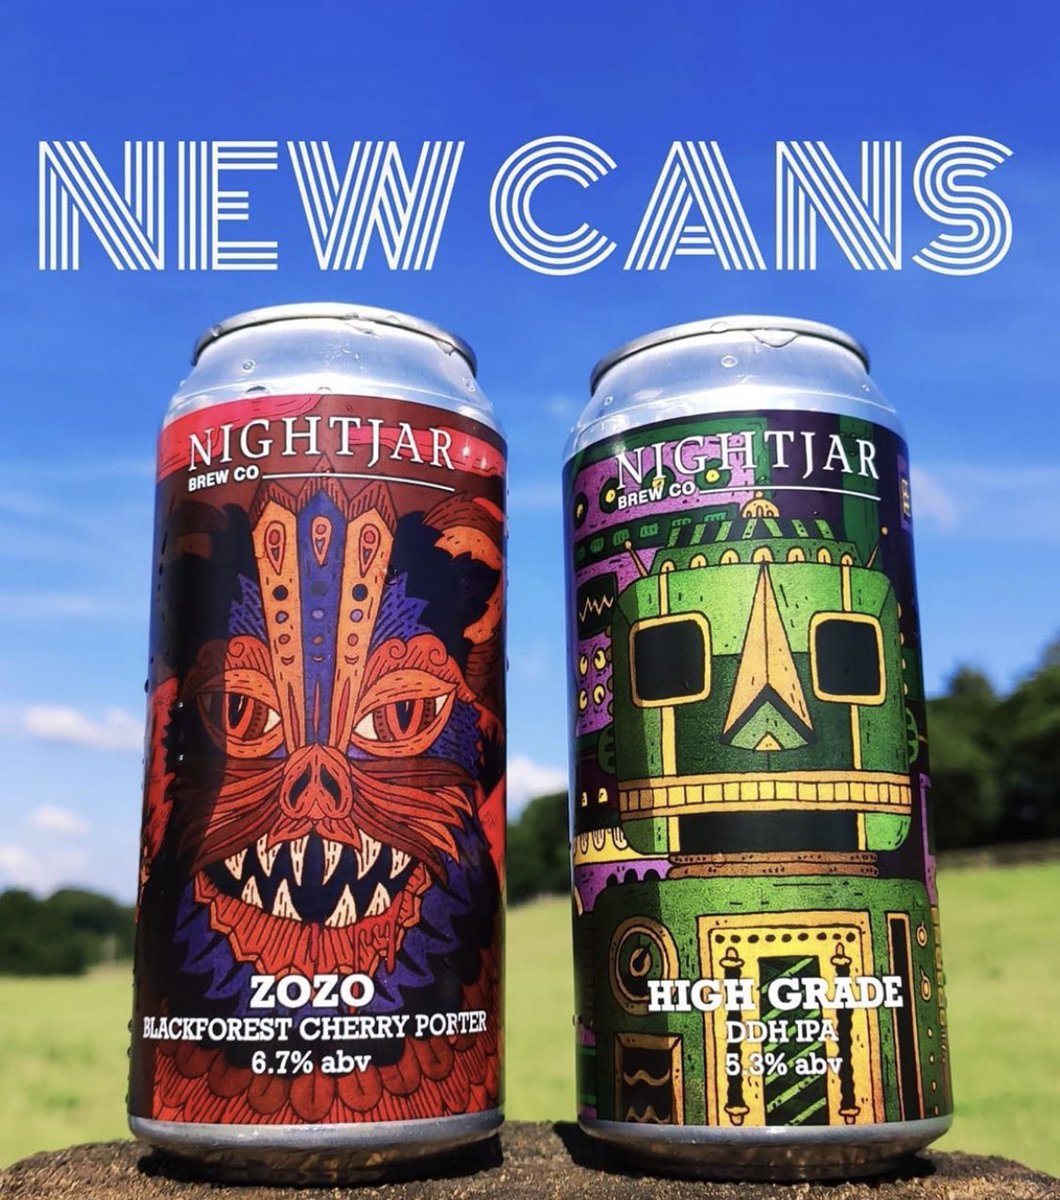 Nightjar Brew Co Drive Thru Brewery Open Tomorrow 11 2pm Two New Fabulous Cans Available With A Range Of 4 Different 5 Litre Bag In A Box Beers Including The Ever